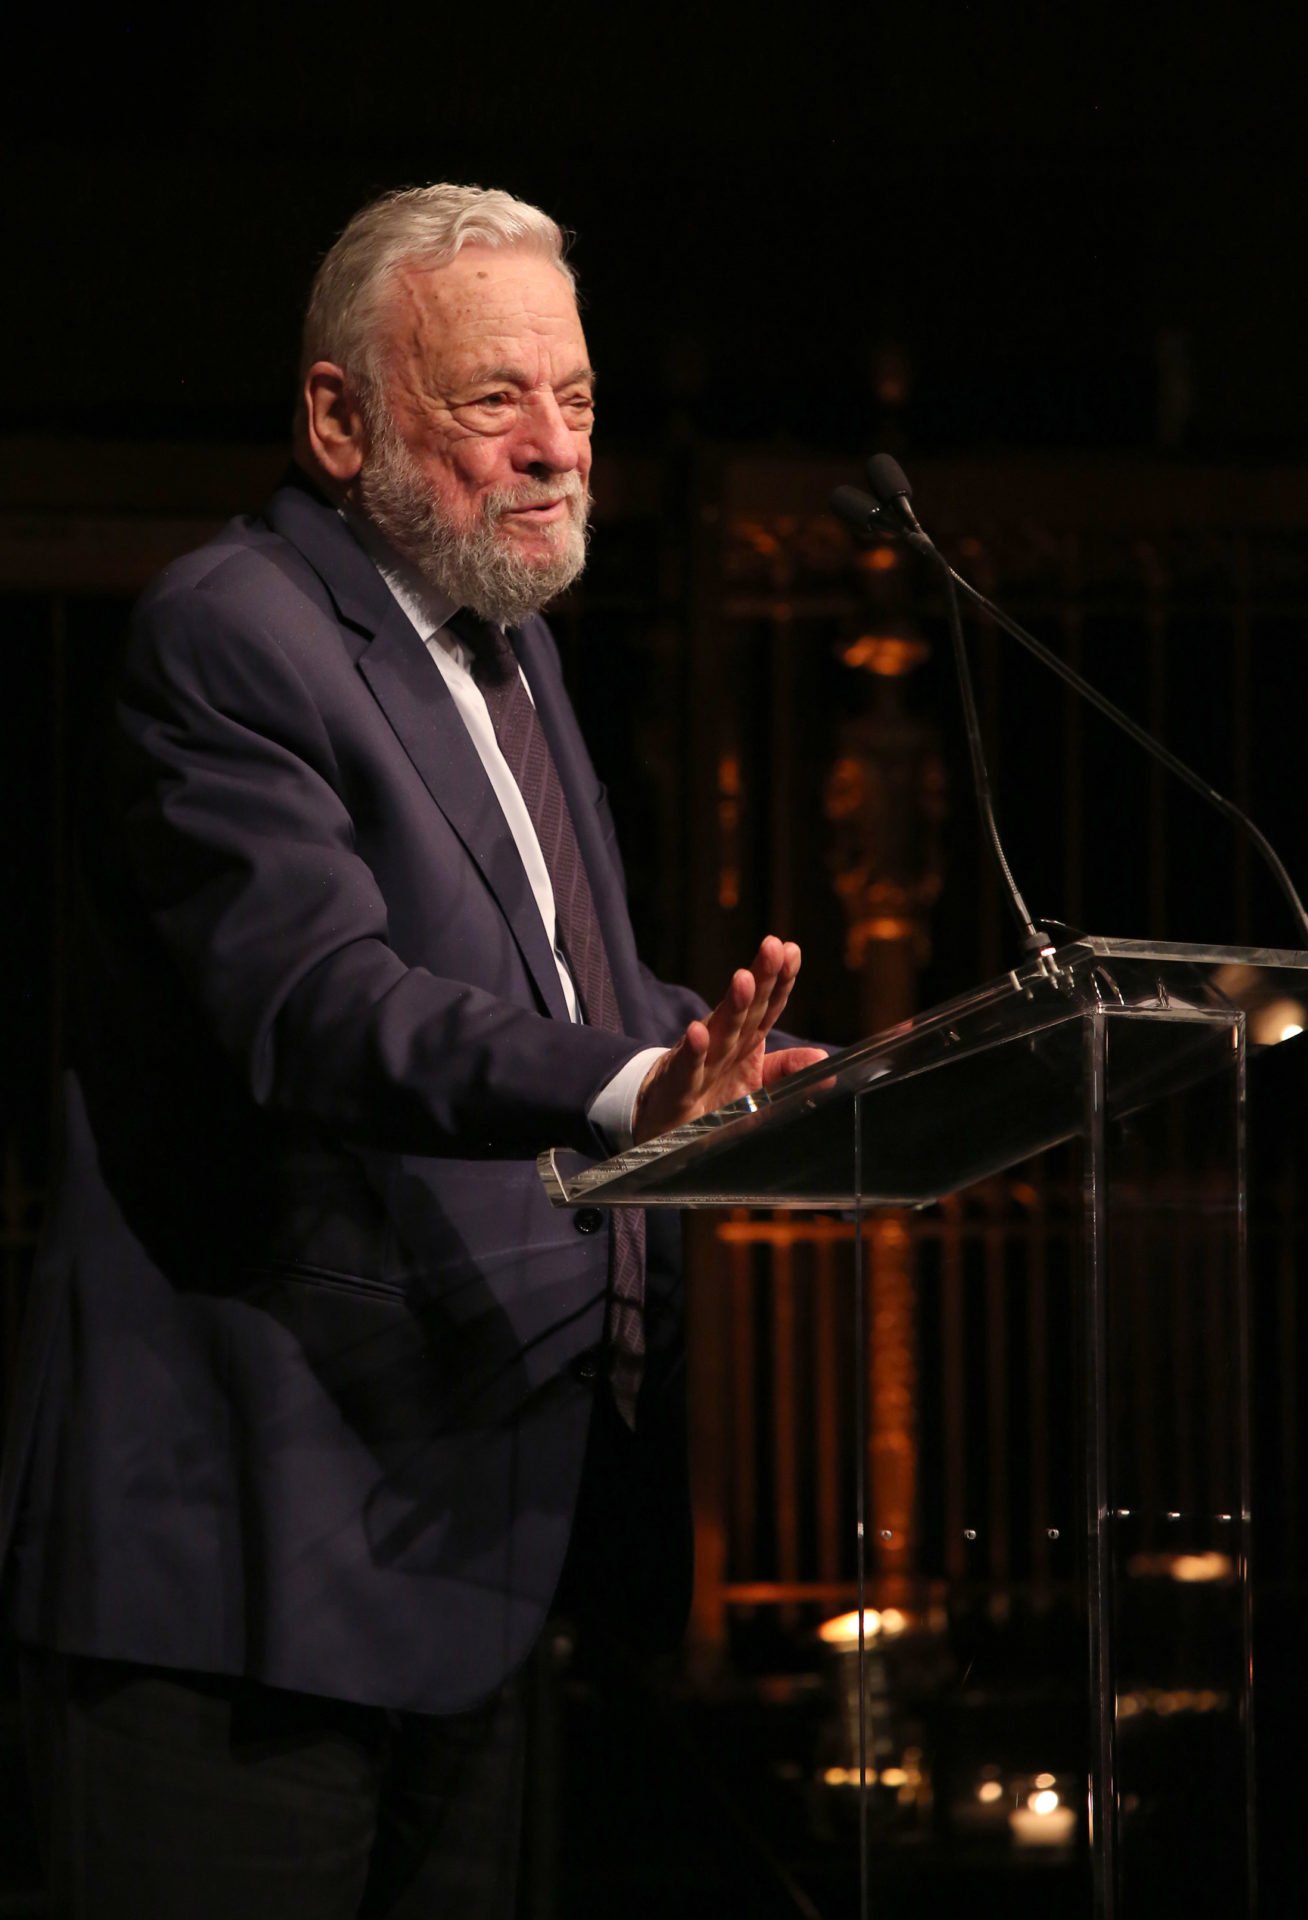 Stephen Sondheim died, biography, net worth, age, songs, theater, cause of death